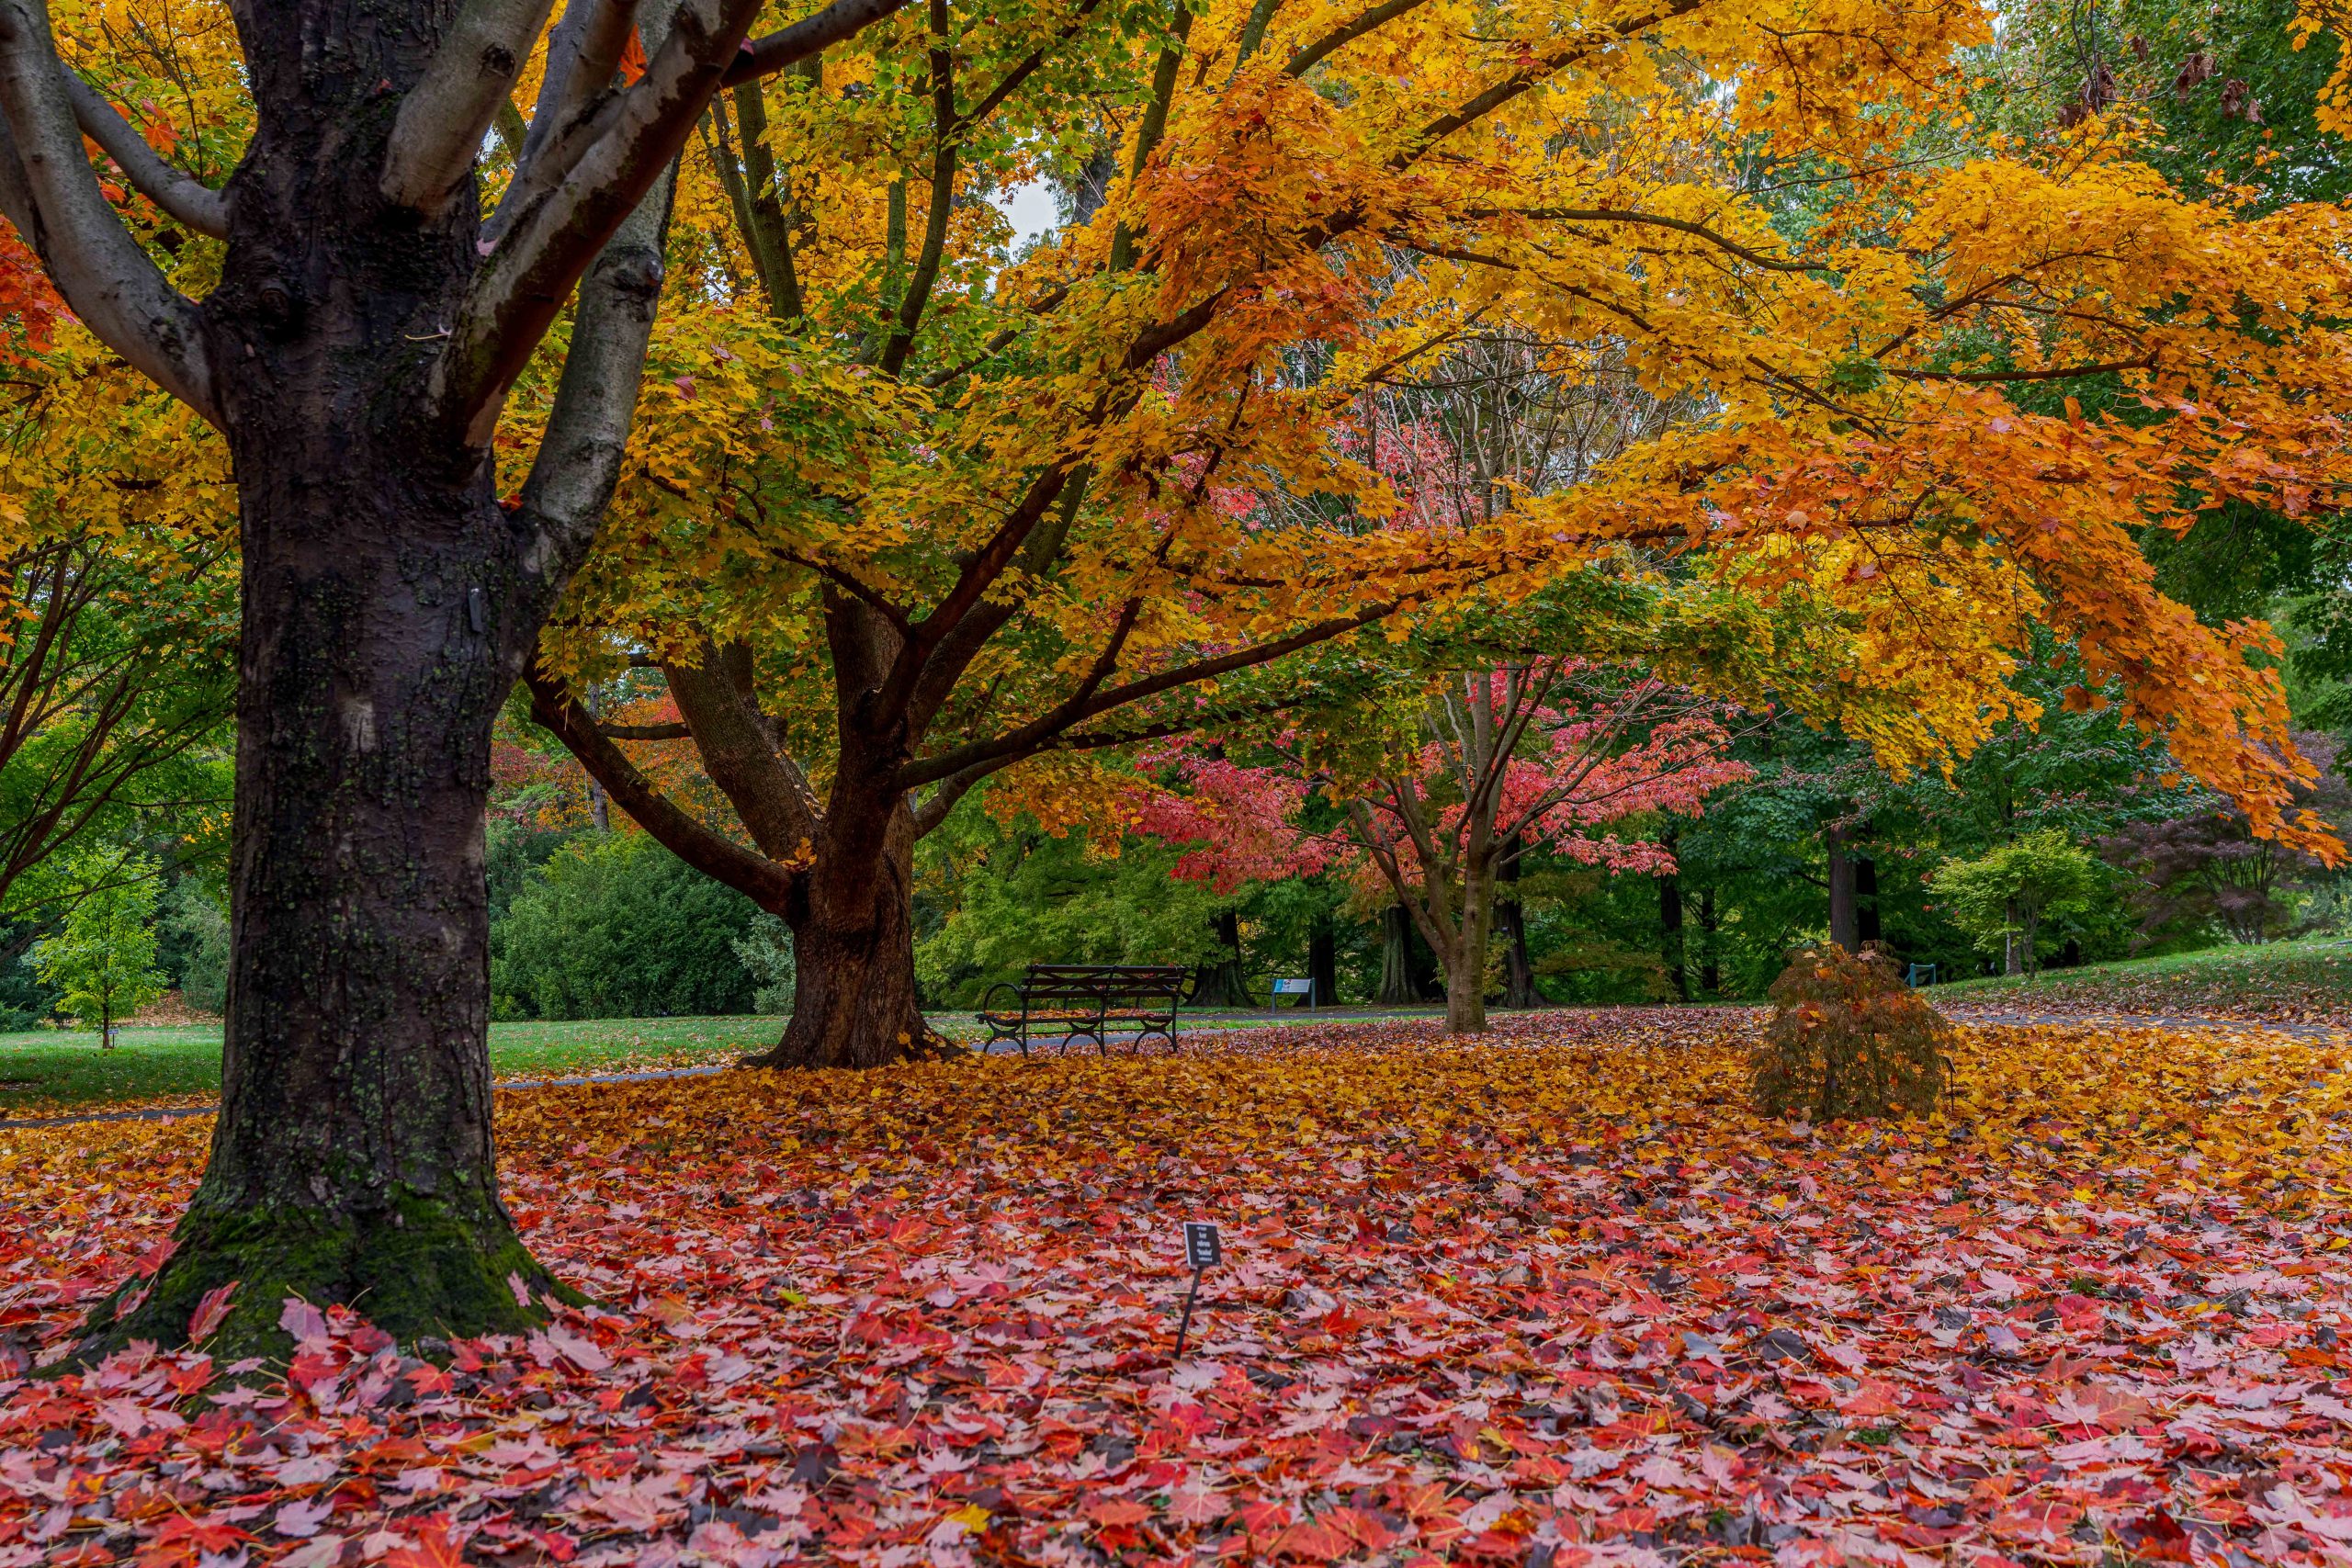 A layer of fallen red leaves sets the scene around changing fall trees